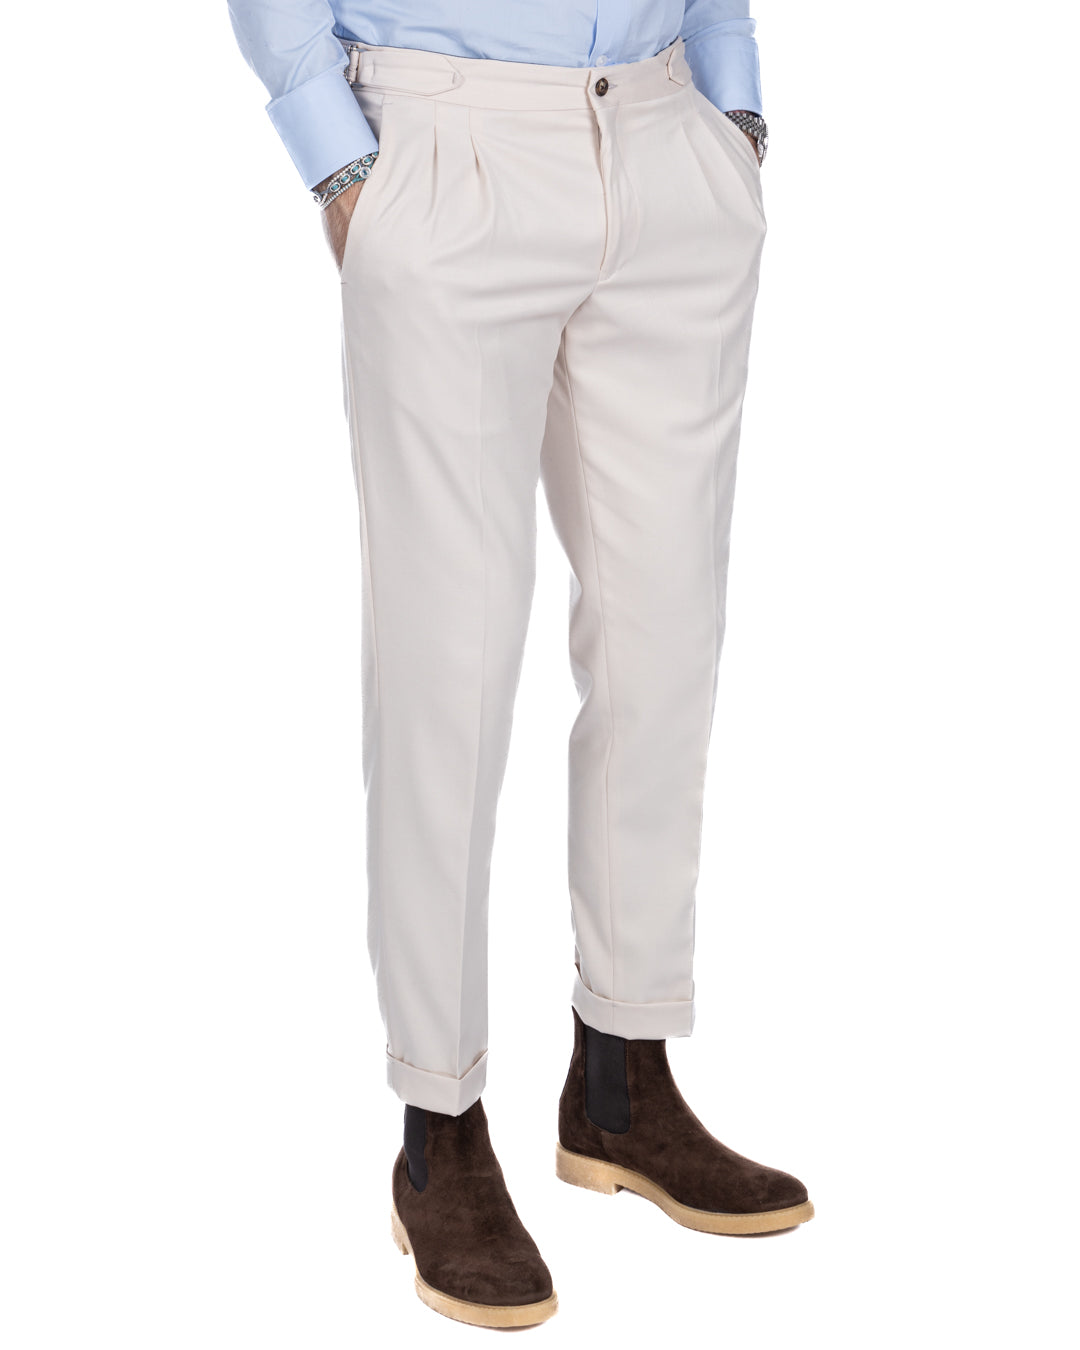 Otranto - cream trousers with buckles and pleats